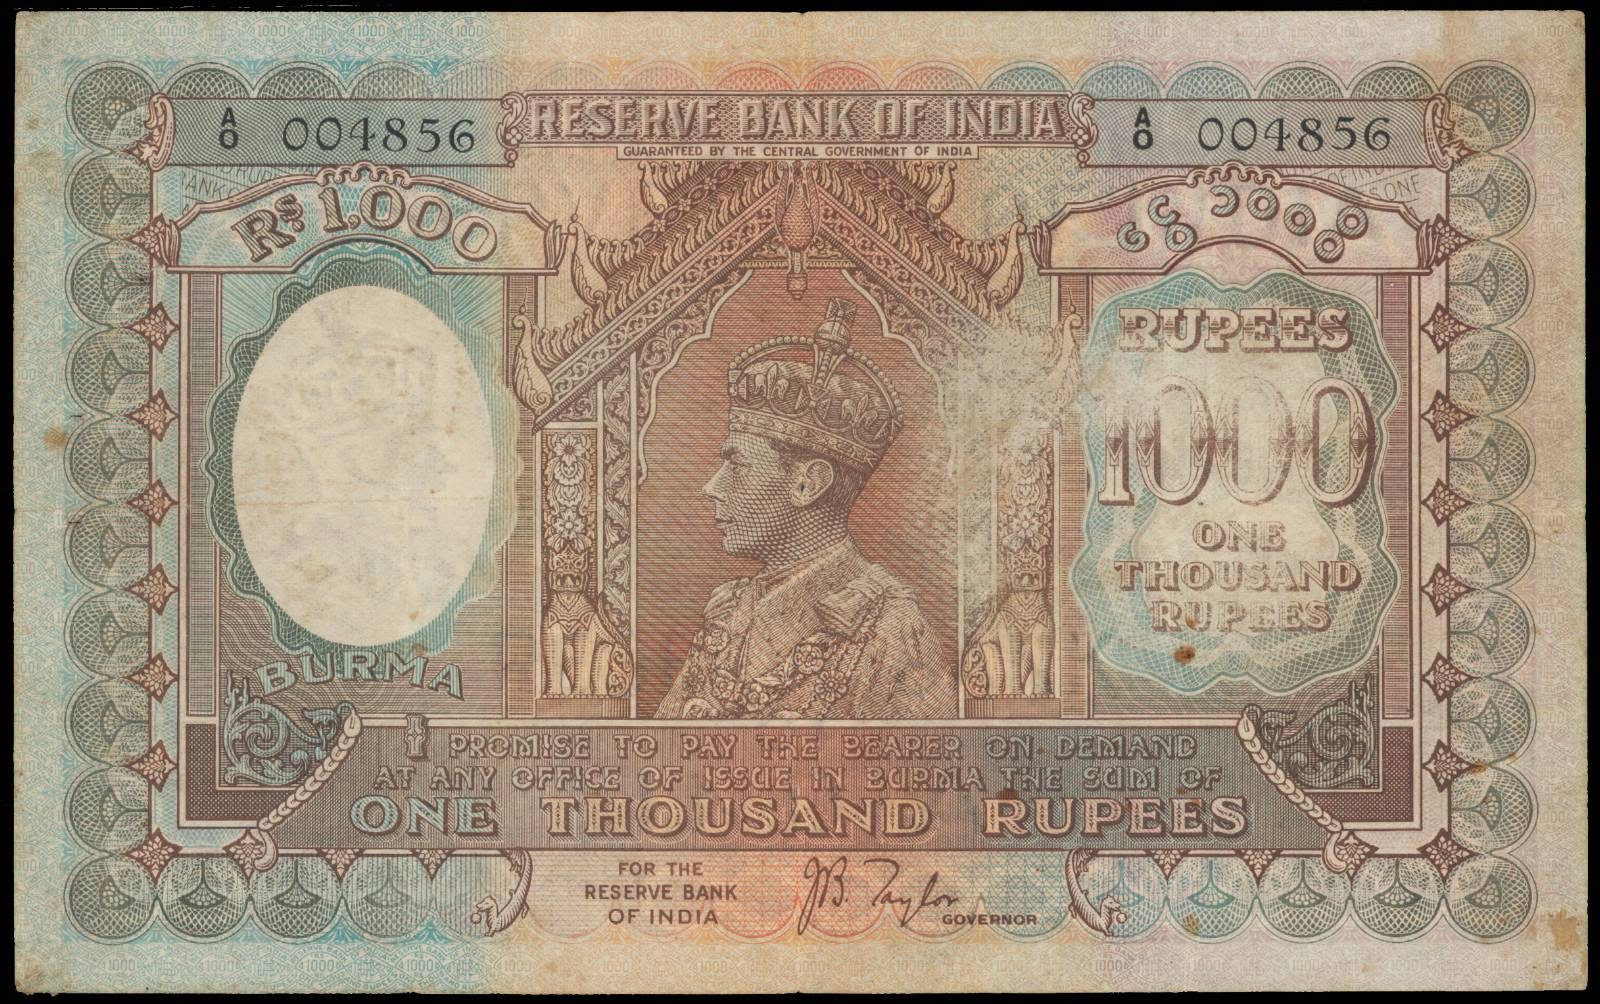 1000 rupees King George VI 1939 Reserve Bank of India banknote for Burma